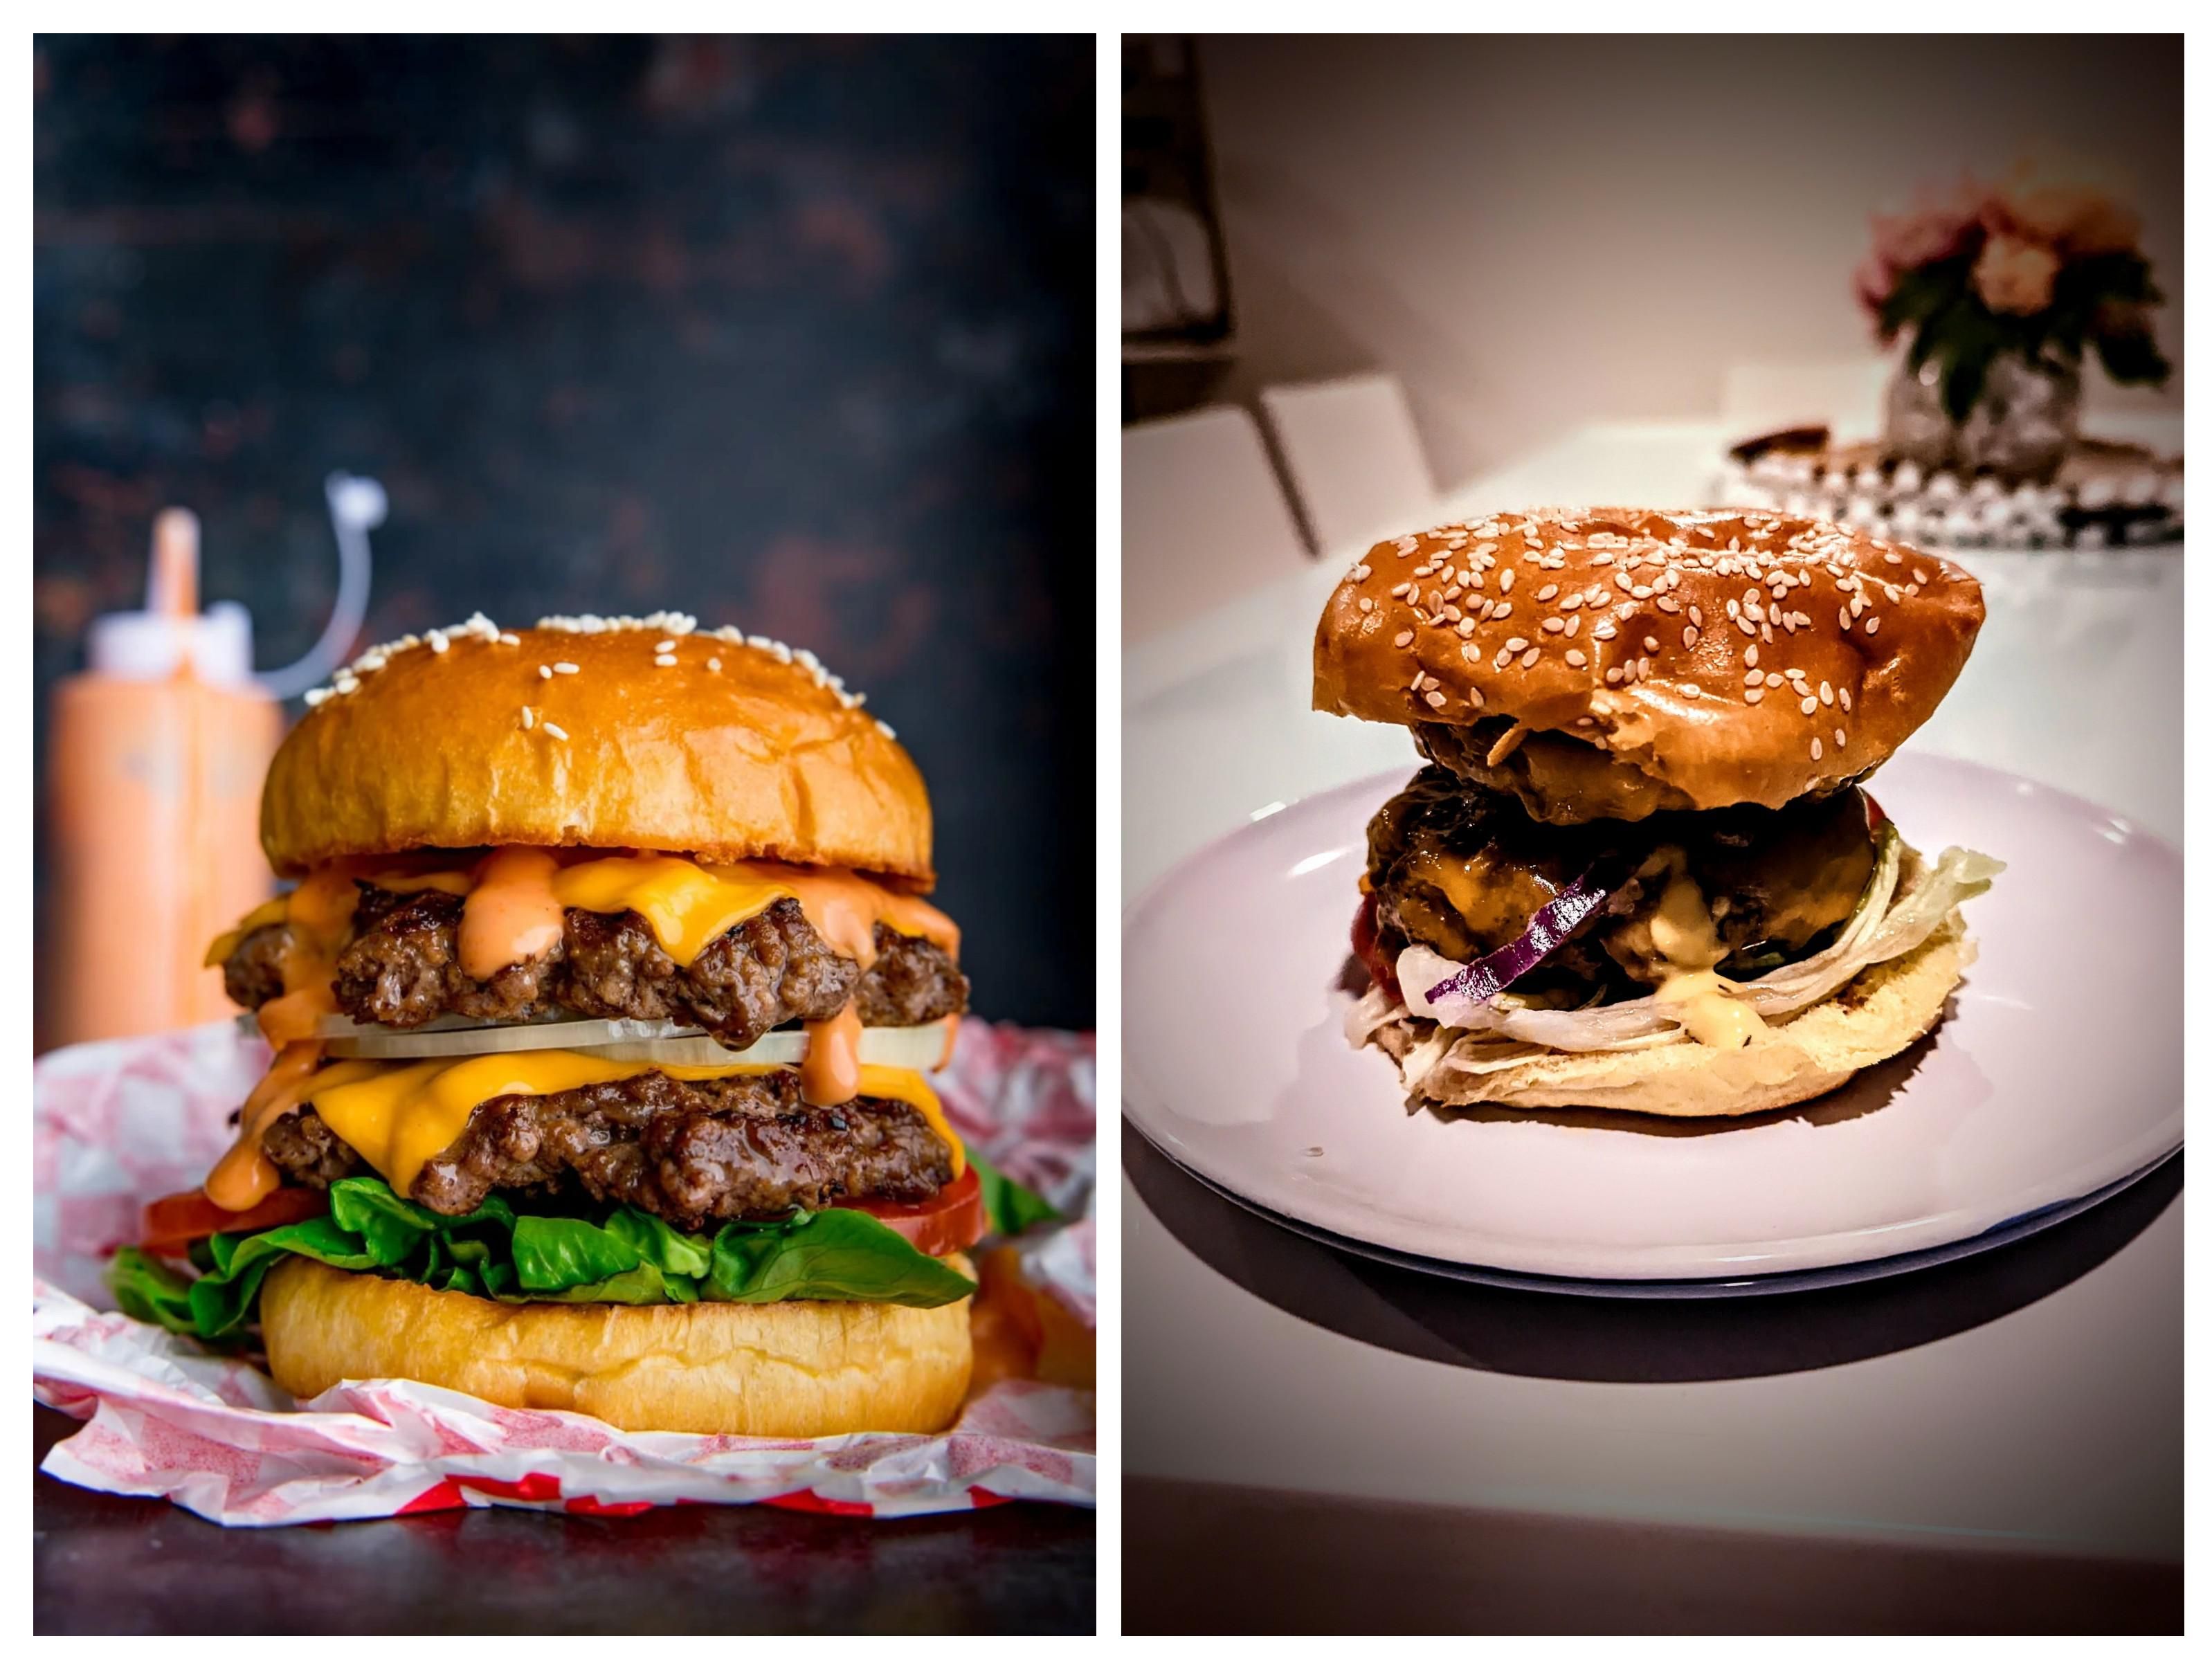 I followed a complete recipe guide to a perfect burger and this is the outcome vs expectation